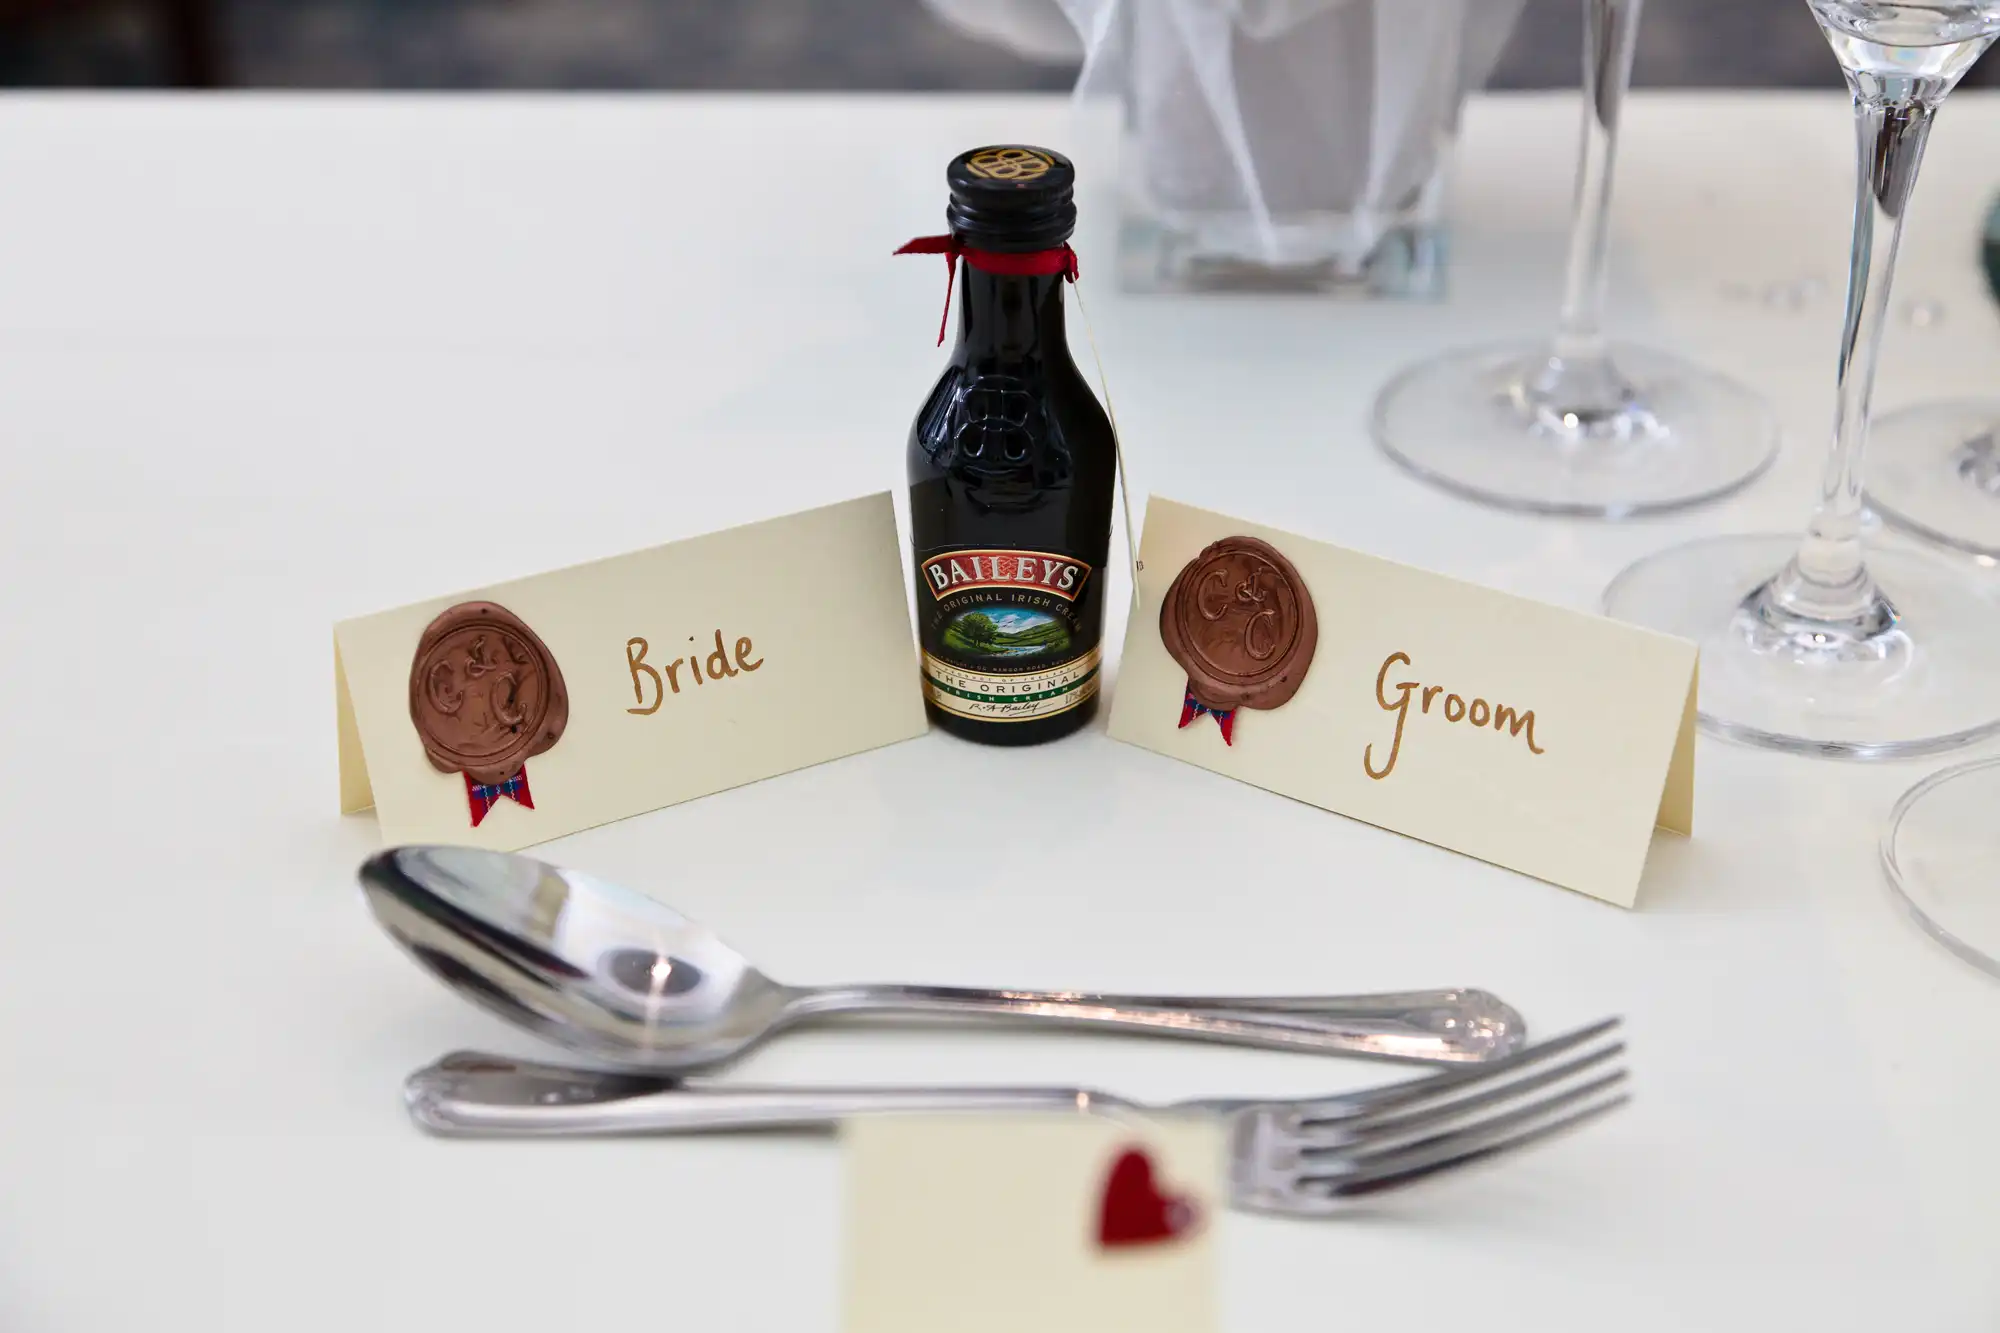 Place cards labeled "bride" and "groom" with wax seals flank a miniature baileys bottle on a dining table, complete with silverware and a heart-shaped decoration.